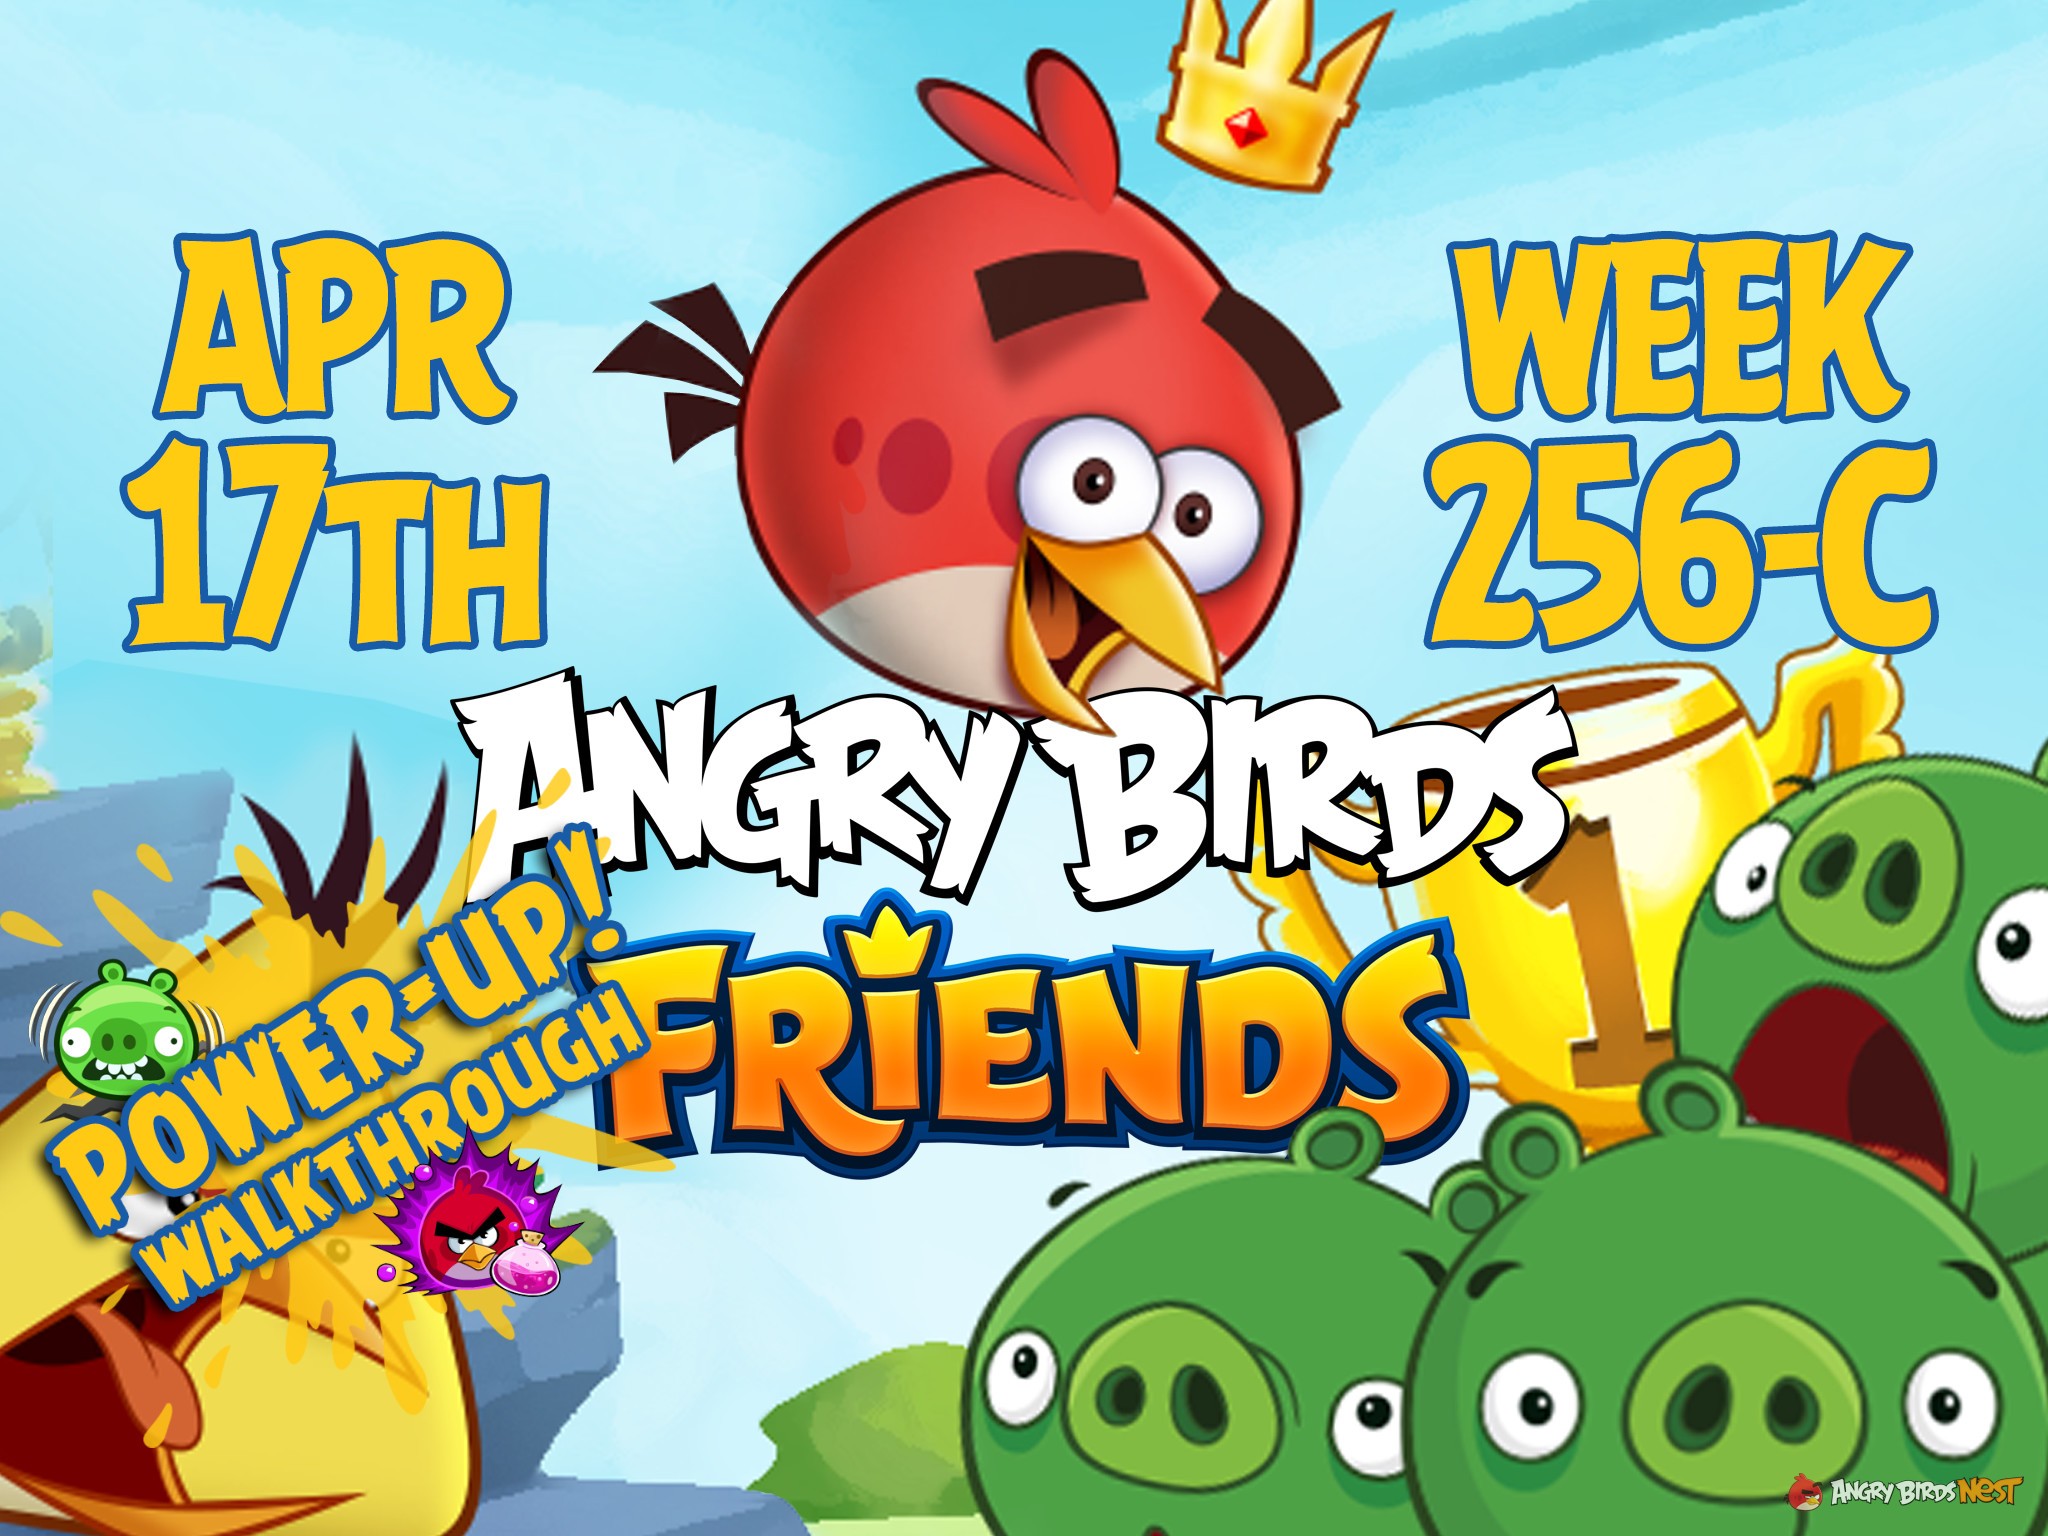 Angry Birds Friends Tournament Week 256-C Feature Image PU